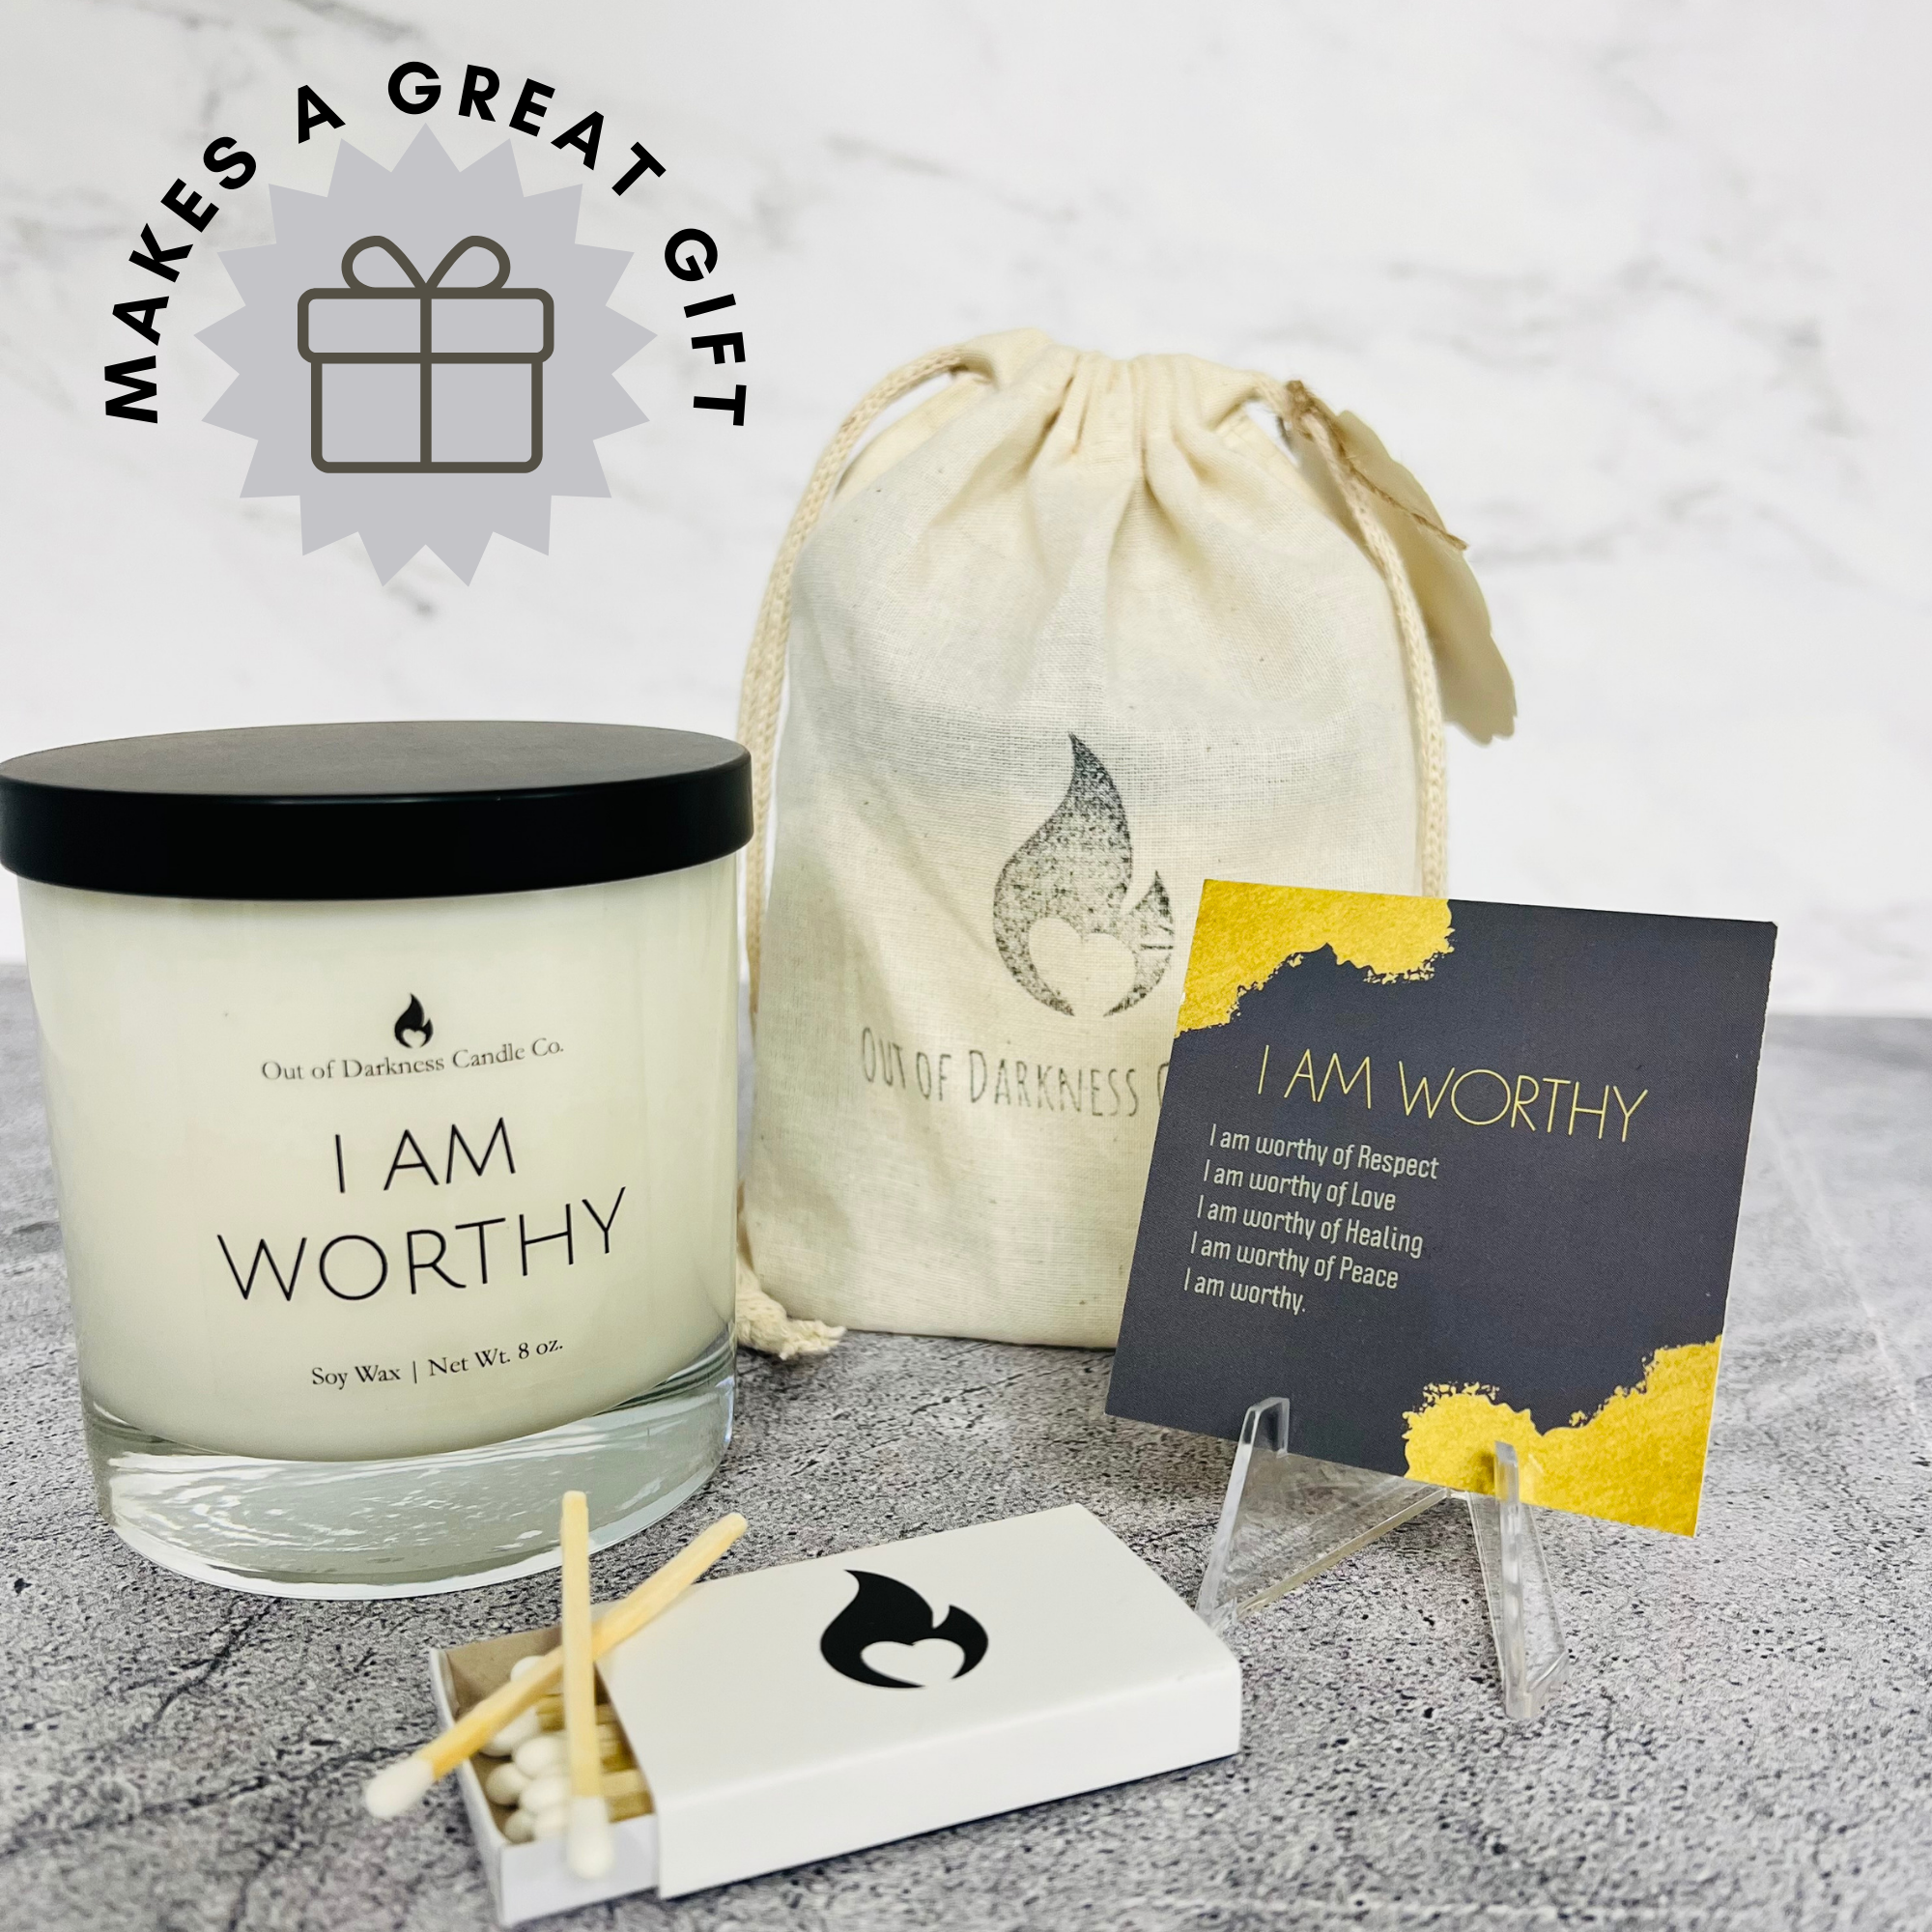 clear glass jar candle says I am worthy a muslin pouch an I am worthy affirmation card and a book of matches, says makes a great gift